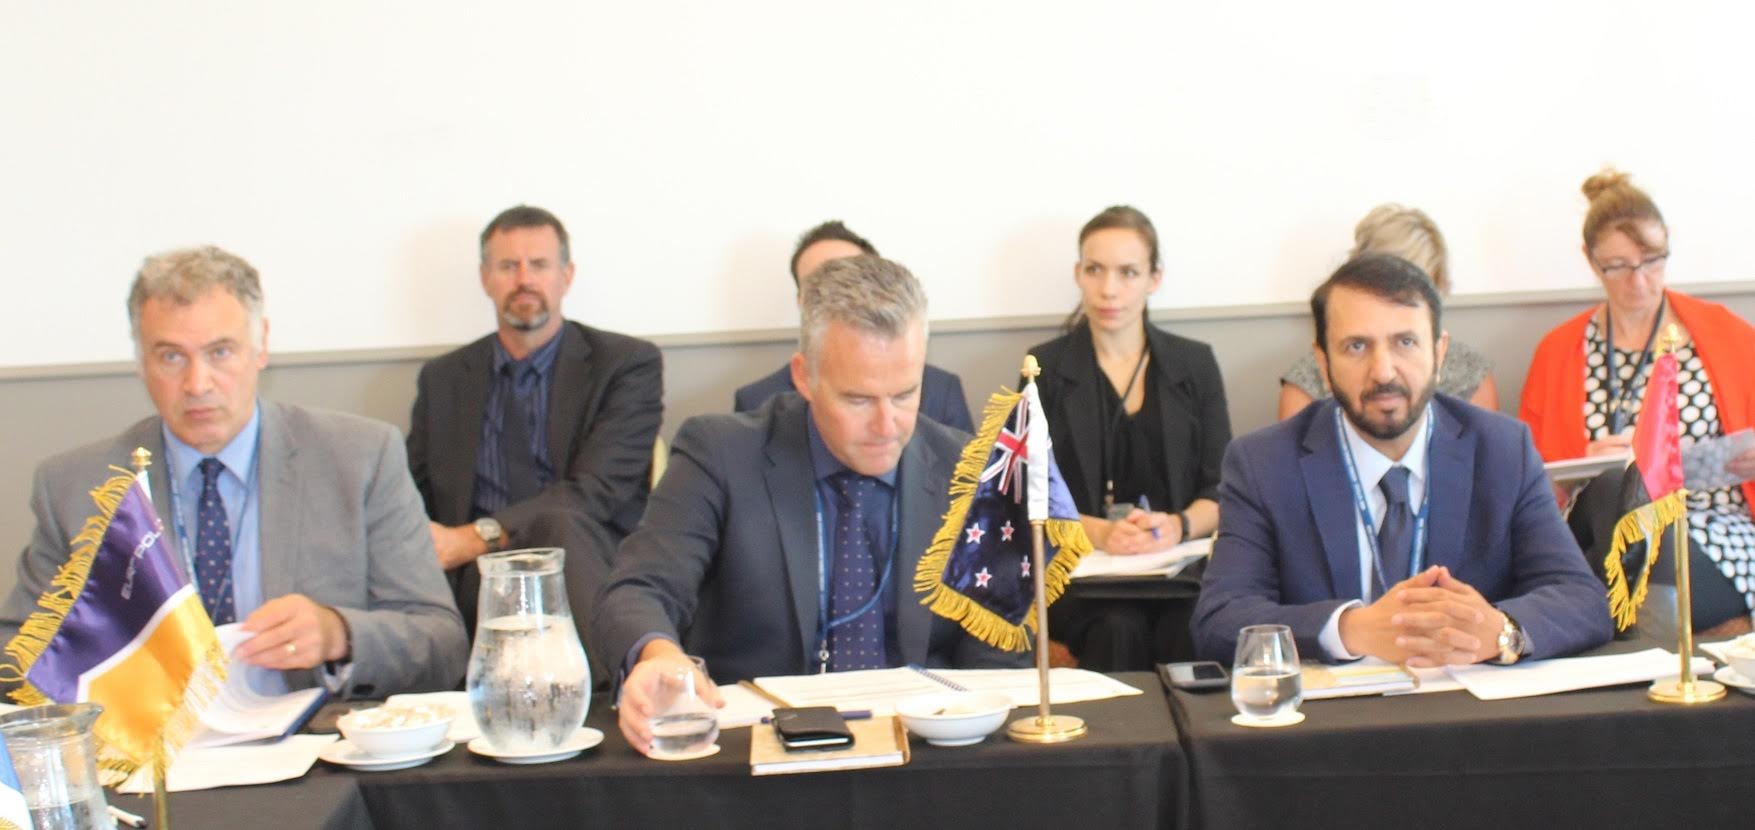 Virtual Global Taskforce meeting concludes in New Zealand